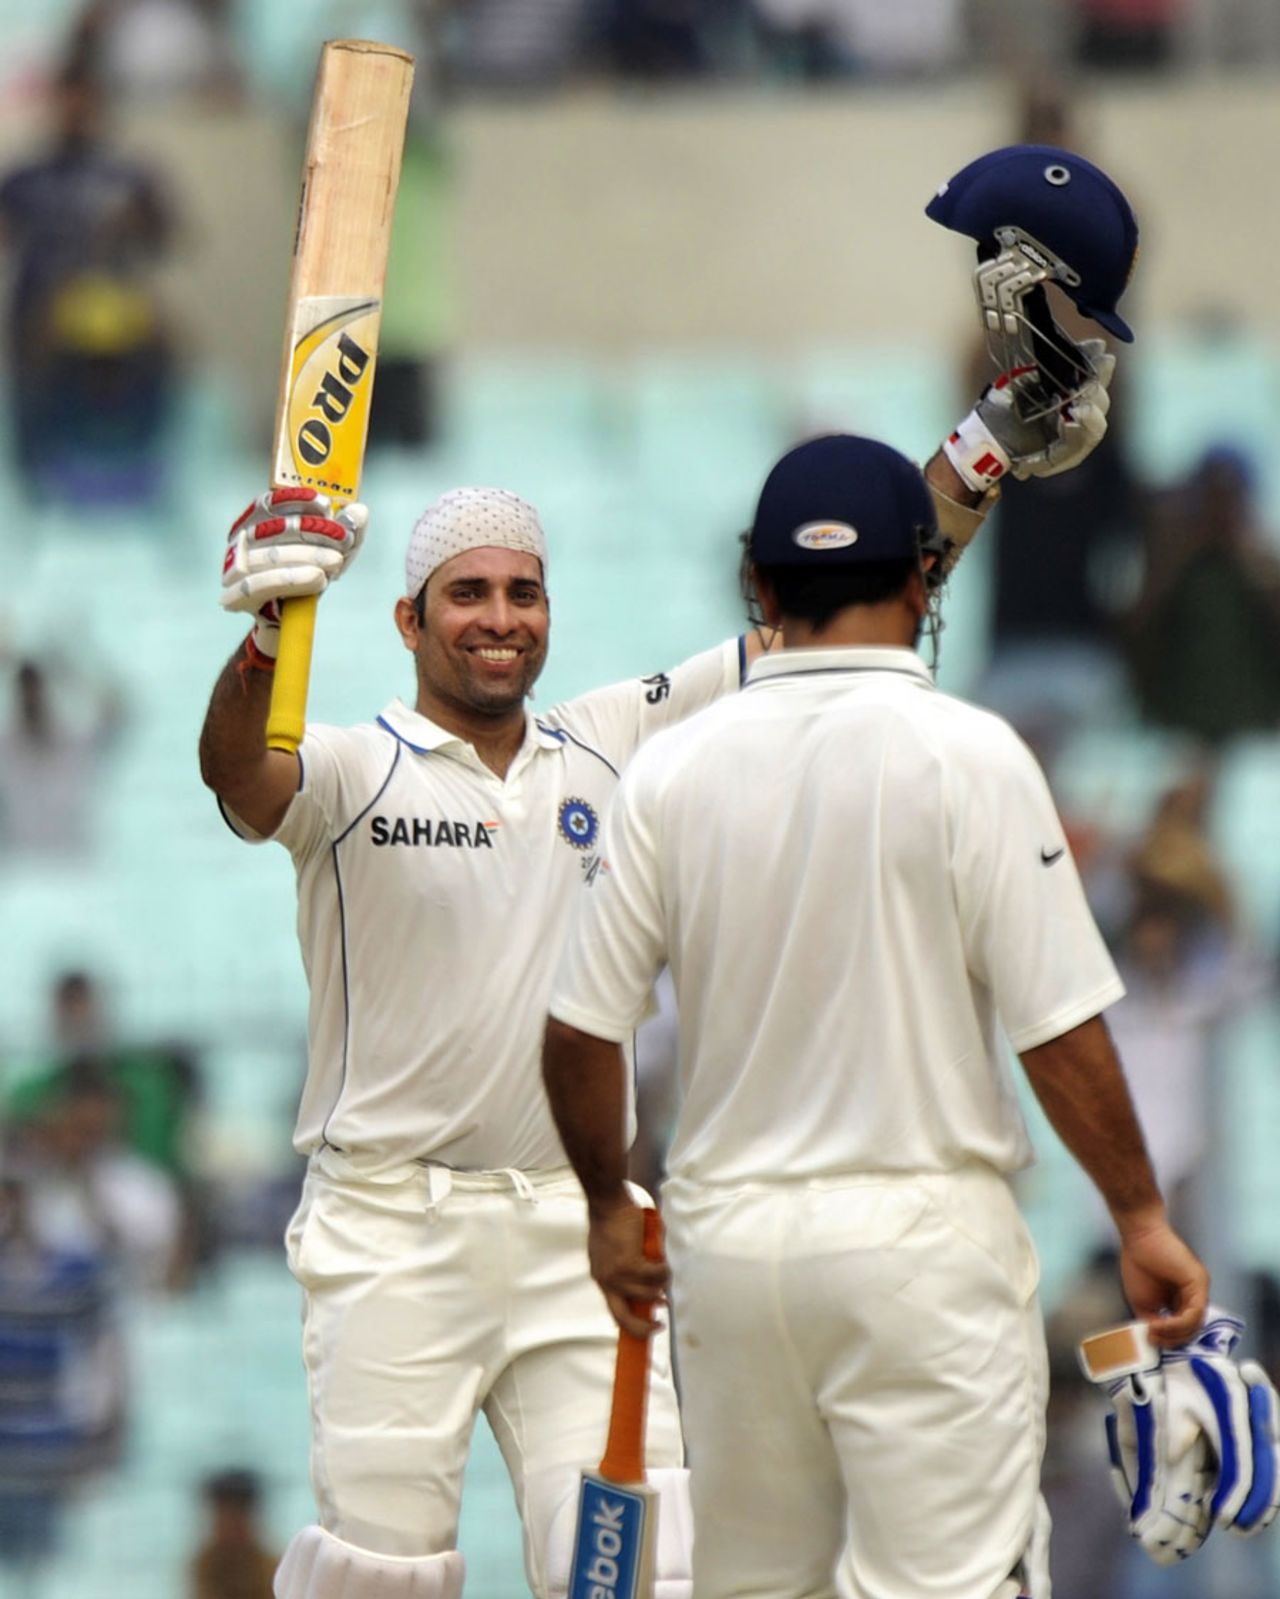 VVS Laxman is all smiles after reaching his hundred, India v West Indies, 2nd Test, Kolkata, 2nd day, November 15, 2011